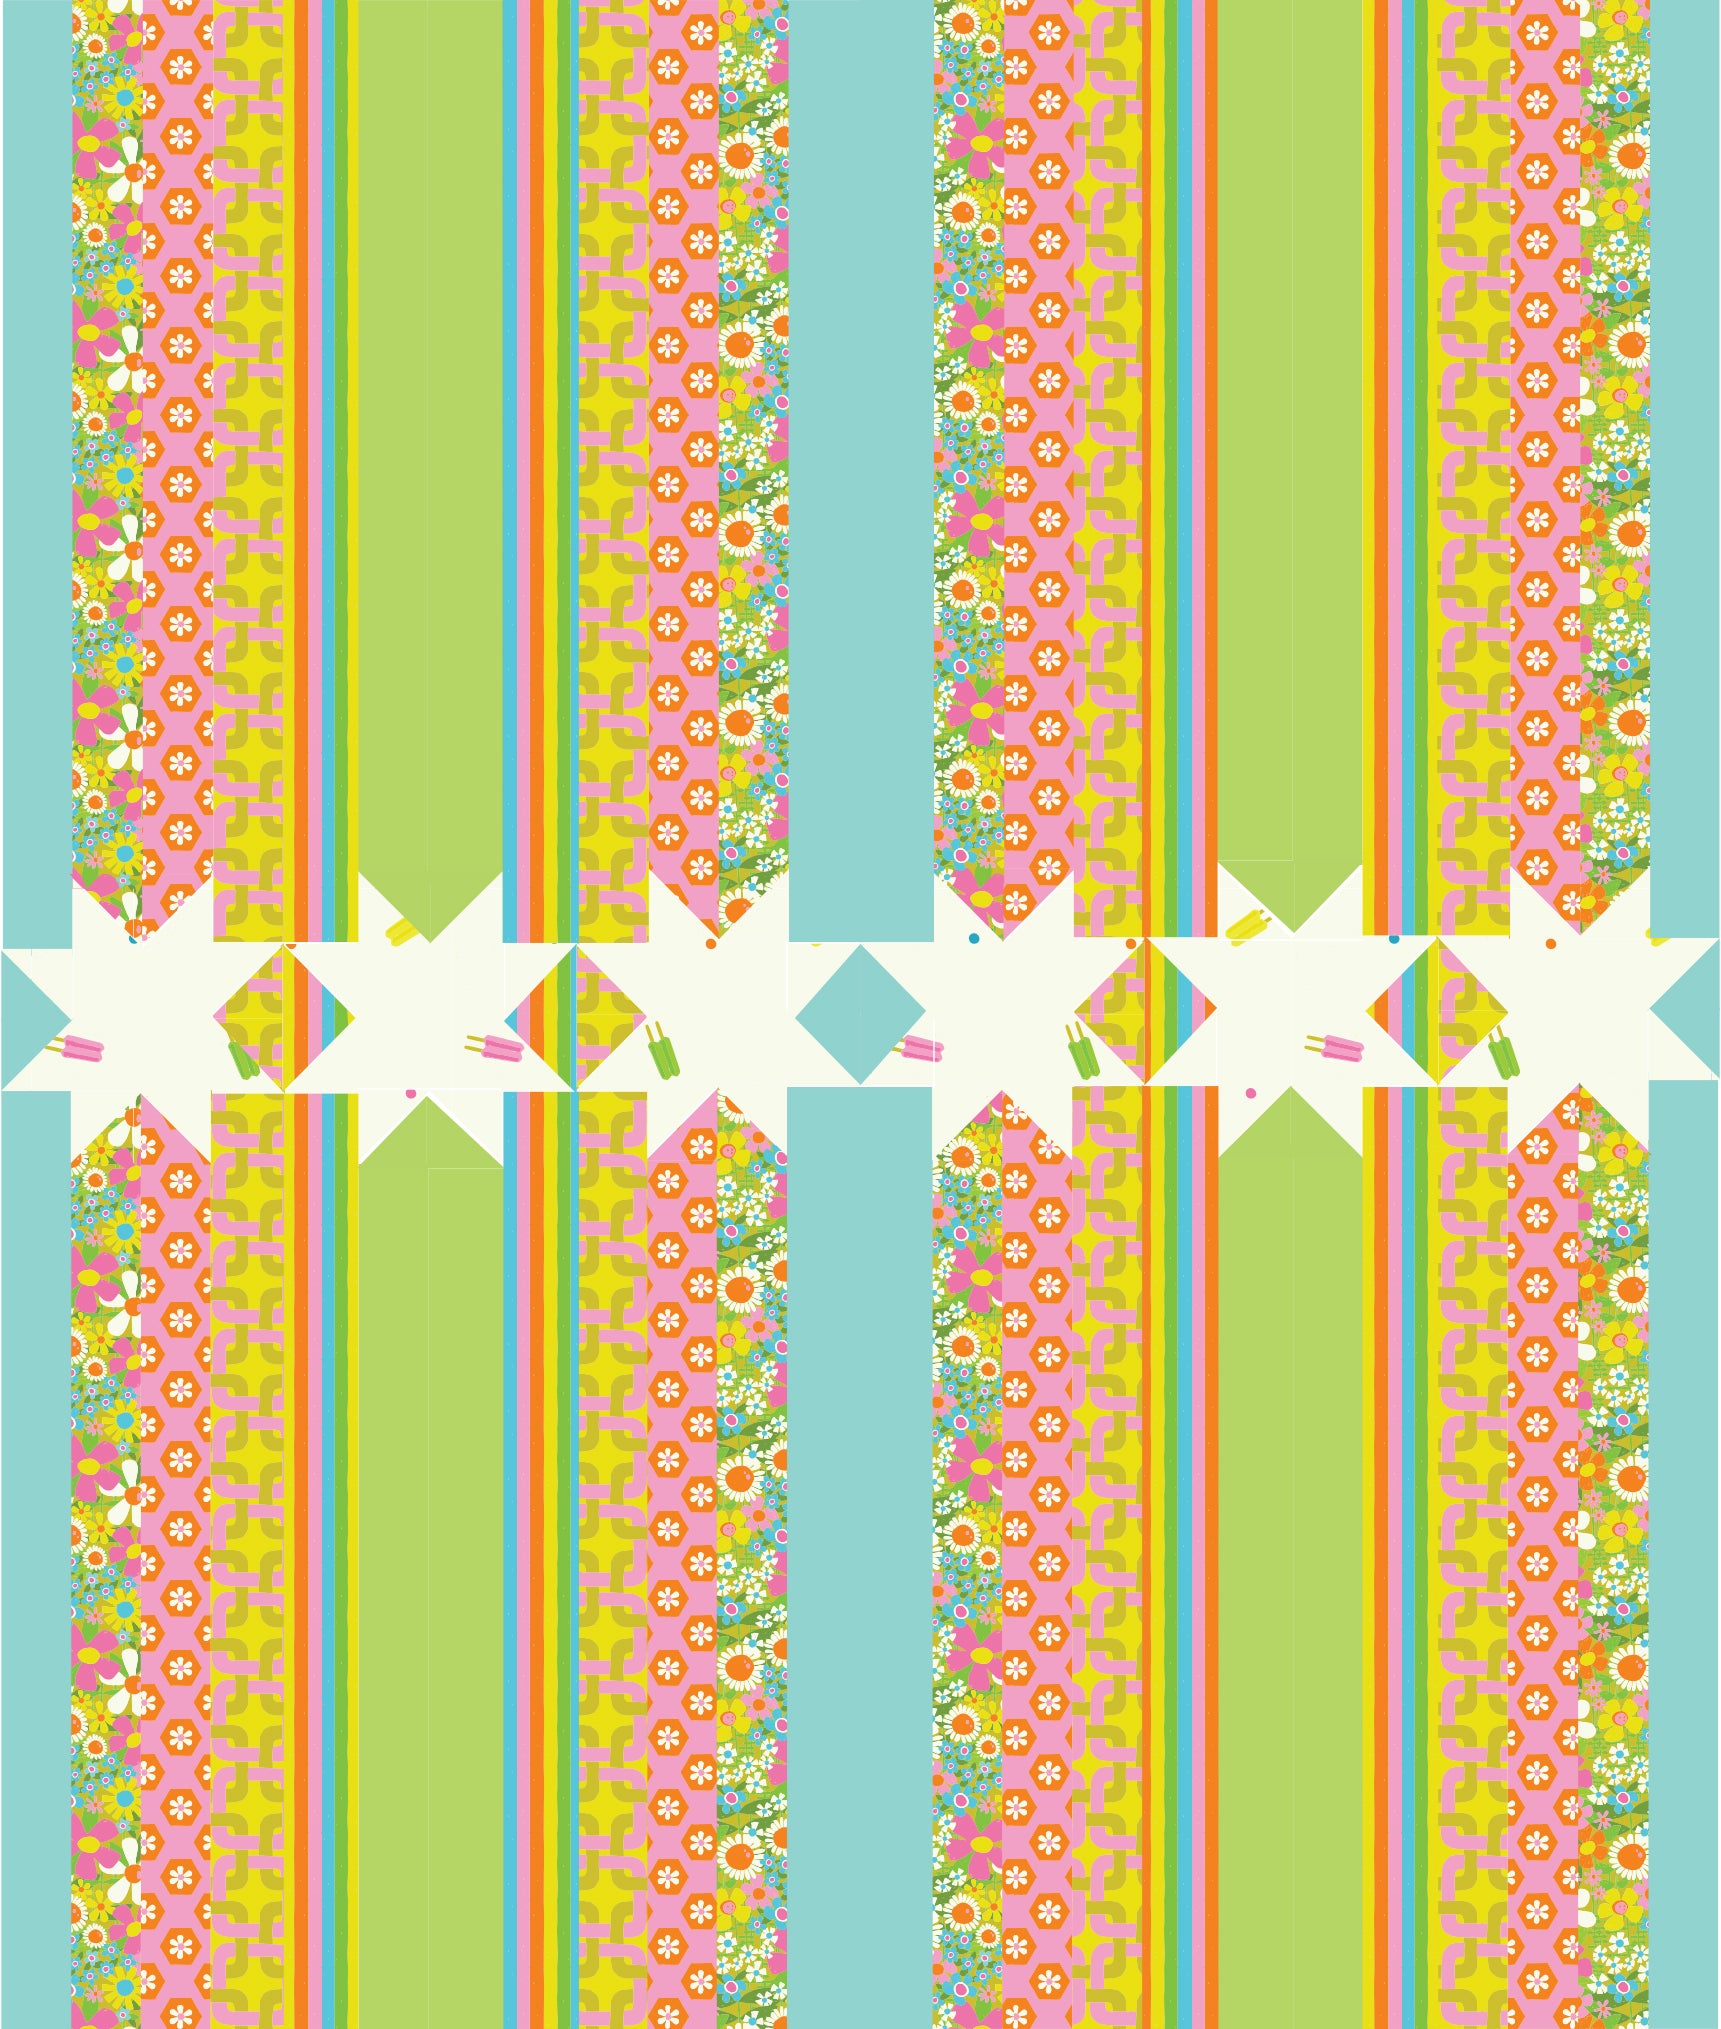 Free Quilt Pattern - Steller by The Retro Quilter